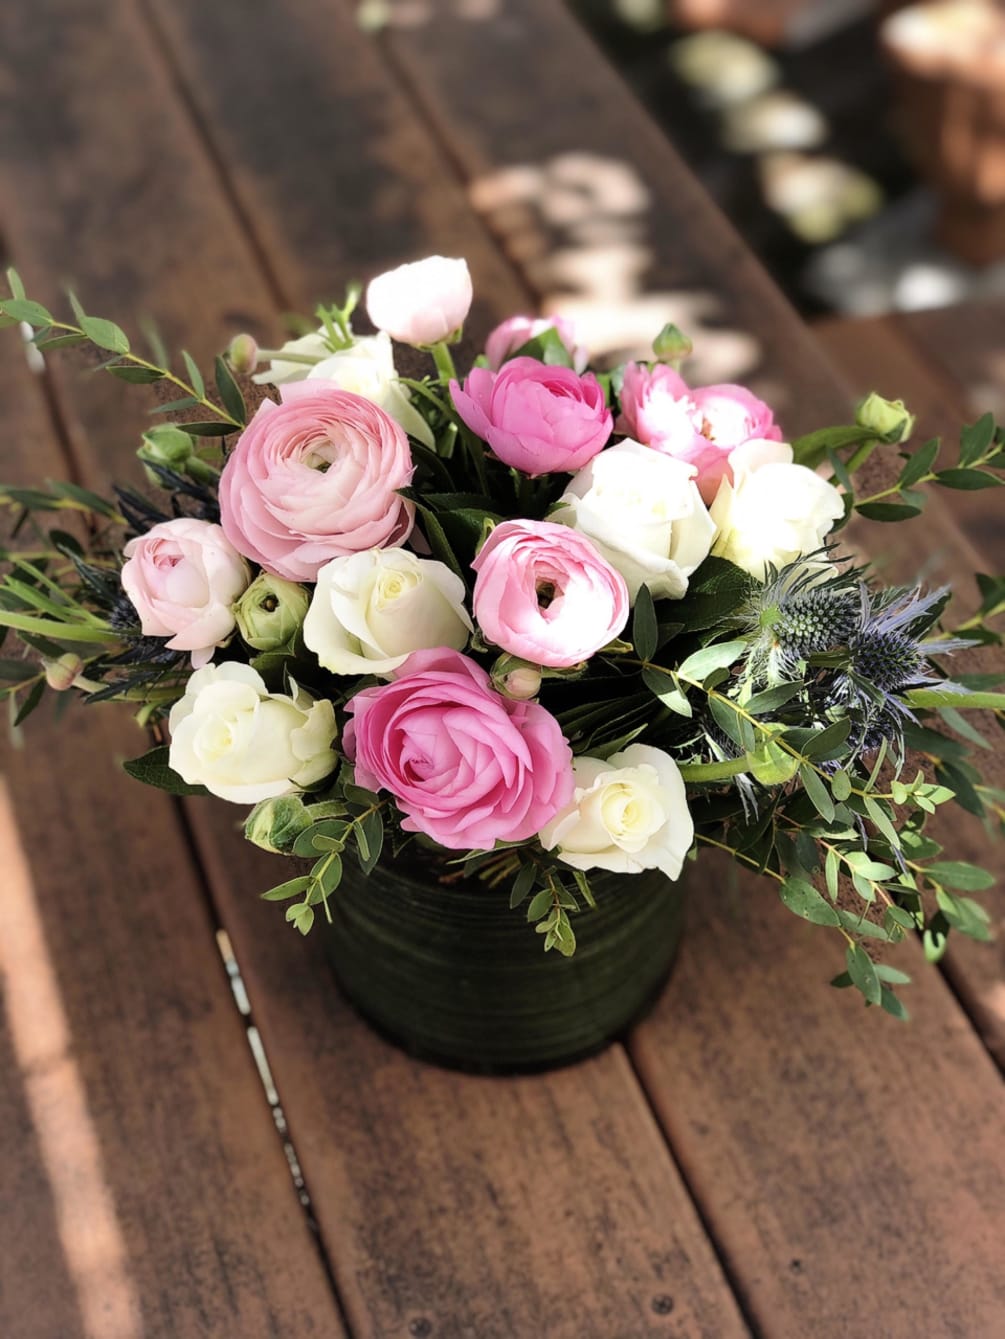 - 8 White Roses
- 8 Pink Ranunculus
- Greenery
- 6 x 6 Inches